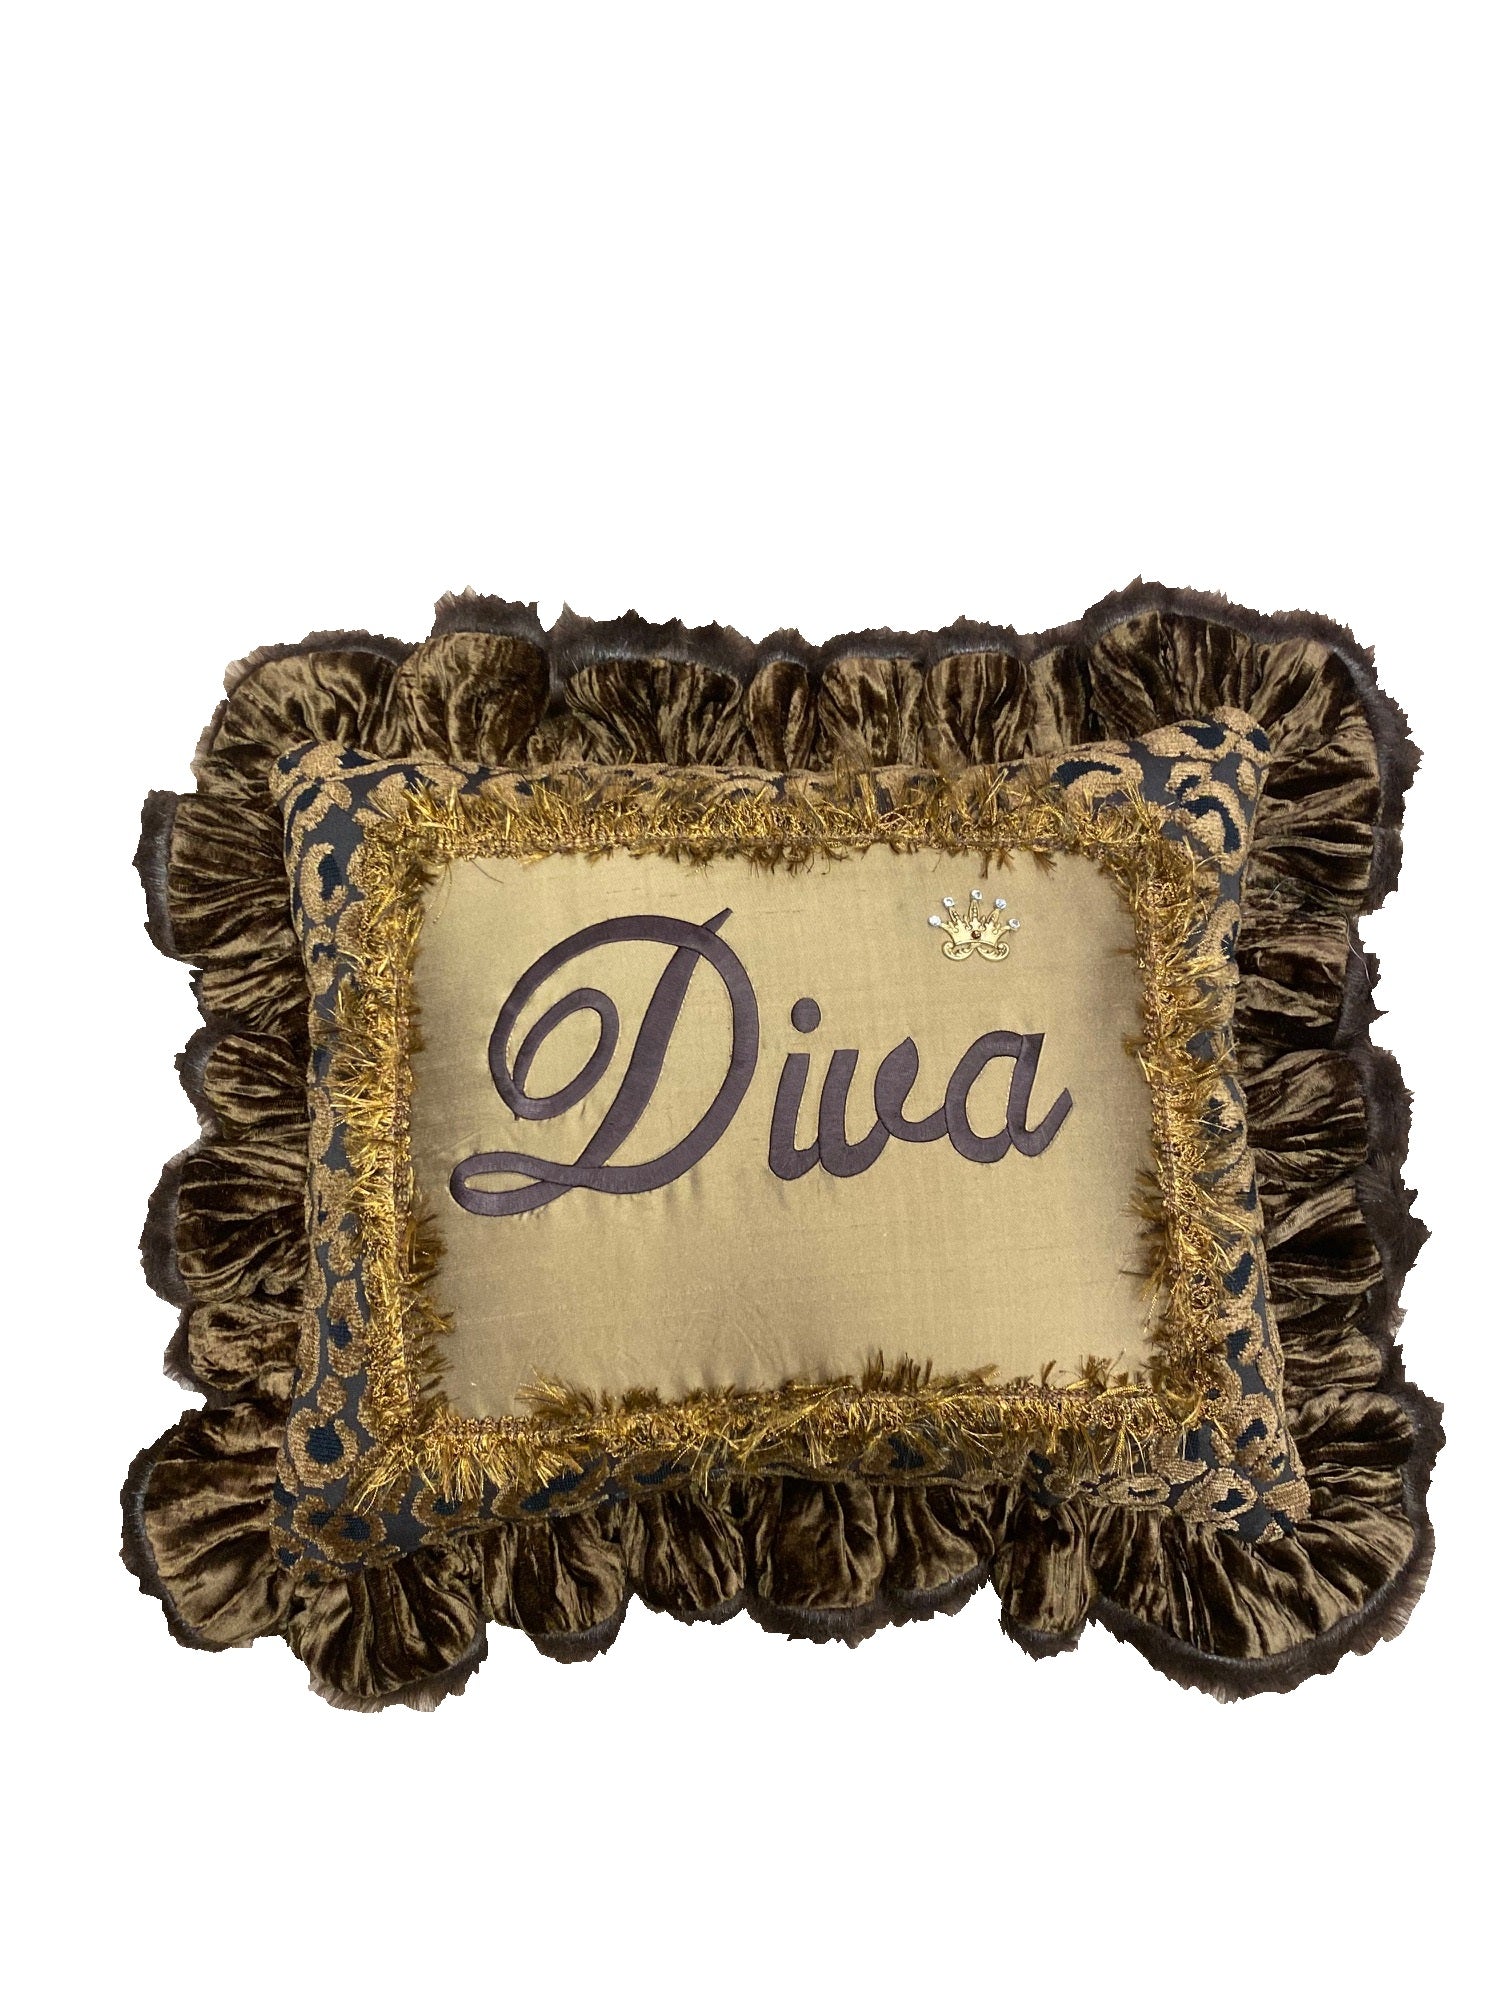 Diva Ruffled Accent Pillow with Leopard